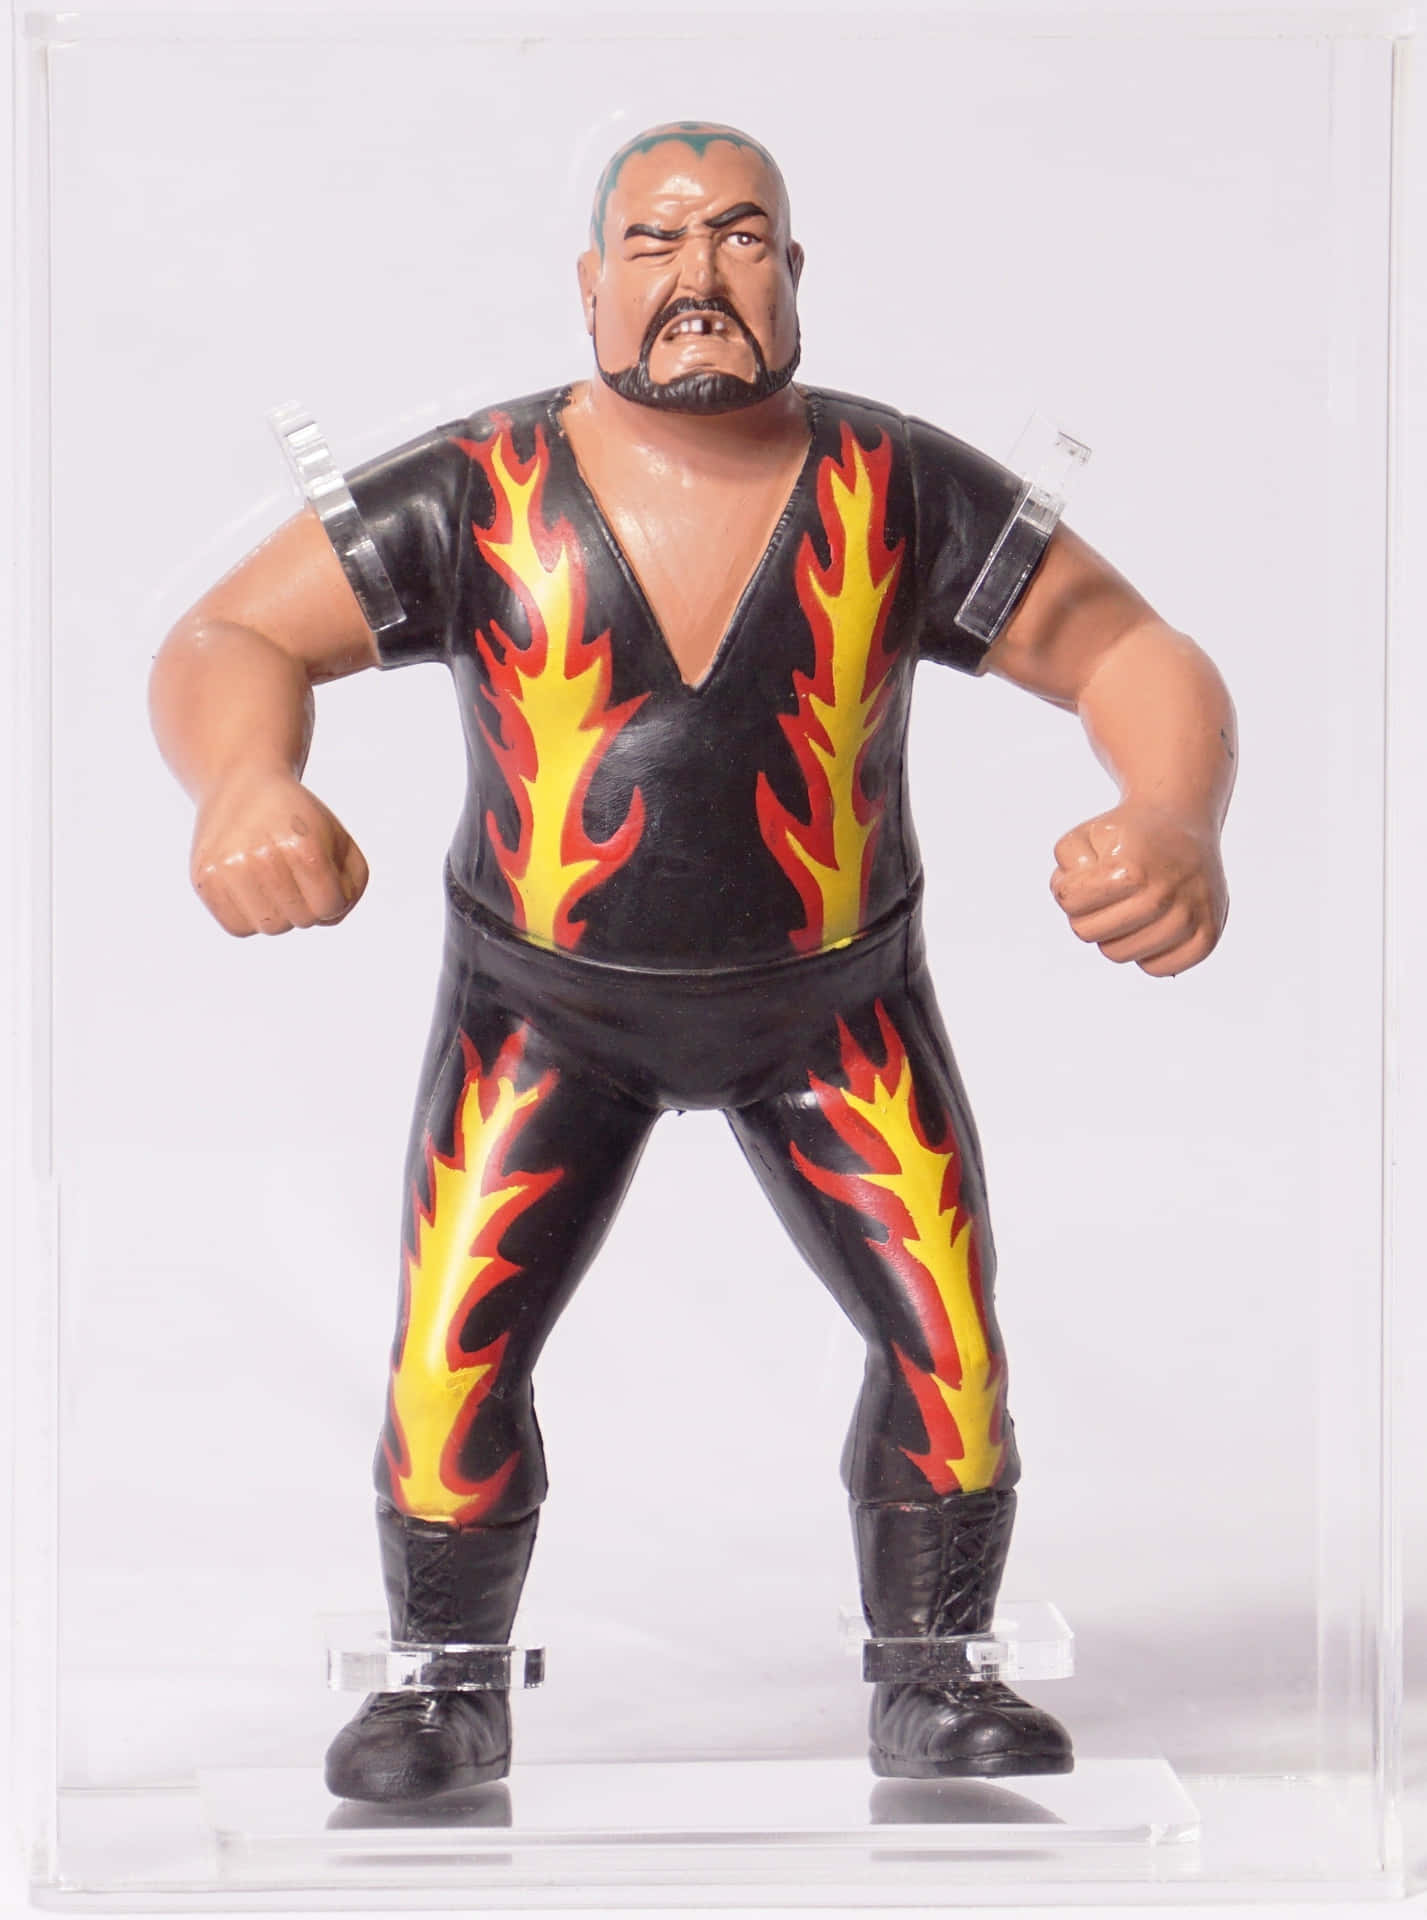 Bambam Bigelow Wwf Ljn Inspirerad Actionfigur - This Would Refer To A Computer Or Mobile Wallpaper Featuring An Image Of A Bam Bam Bigelow Action Figure Inspired By The World Wrestling Federation (wwf) Toy Line From Ljn. Wallpaper